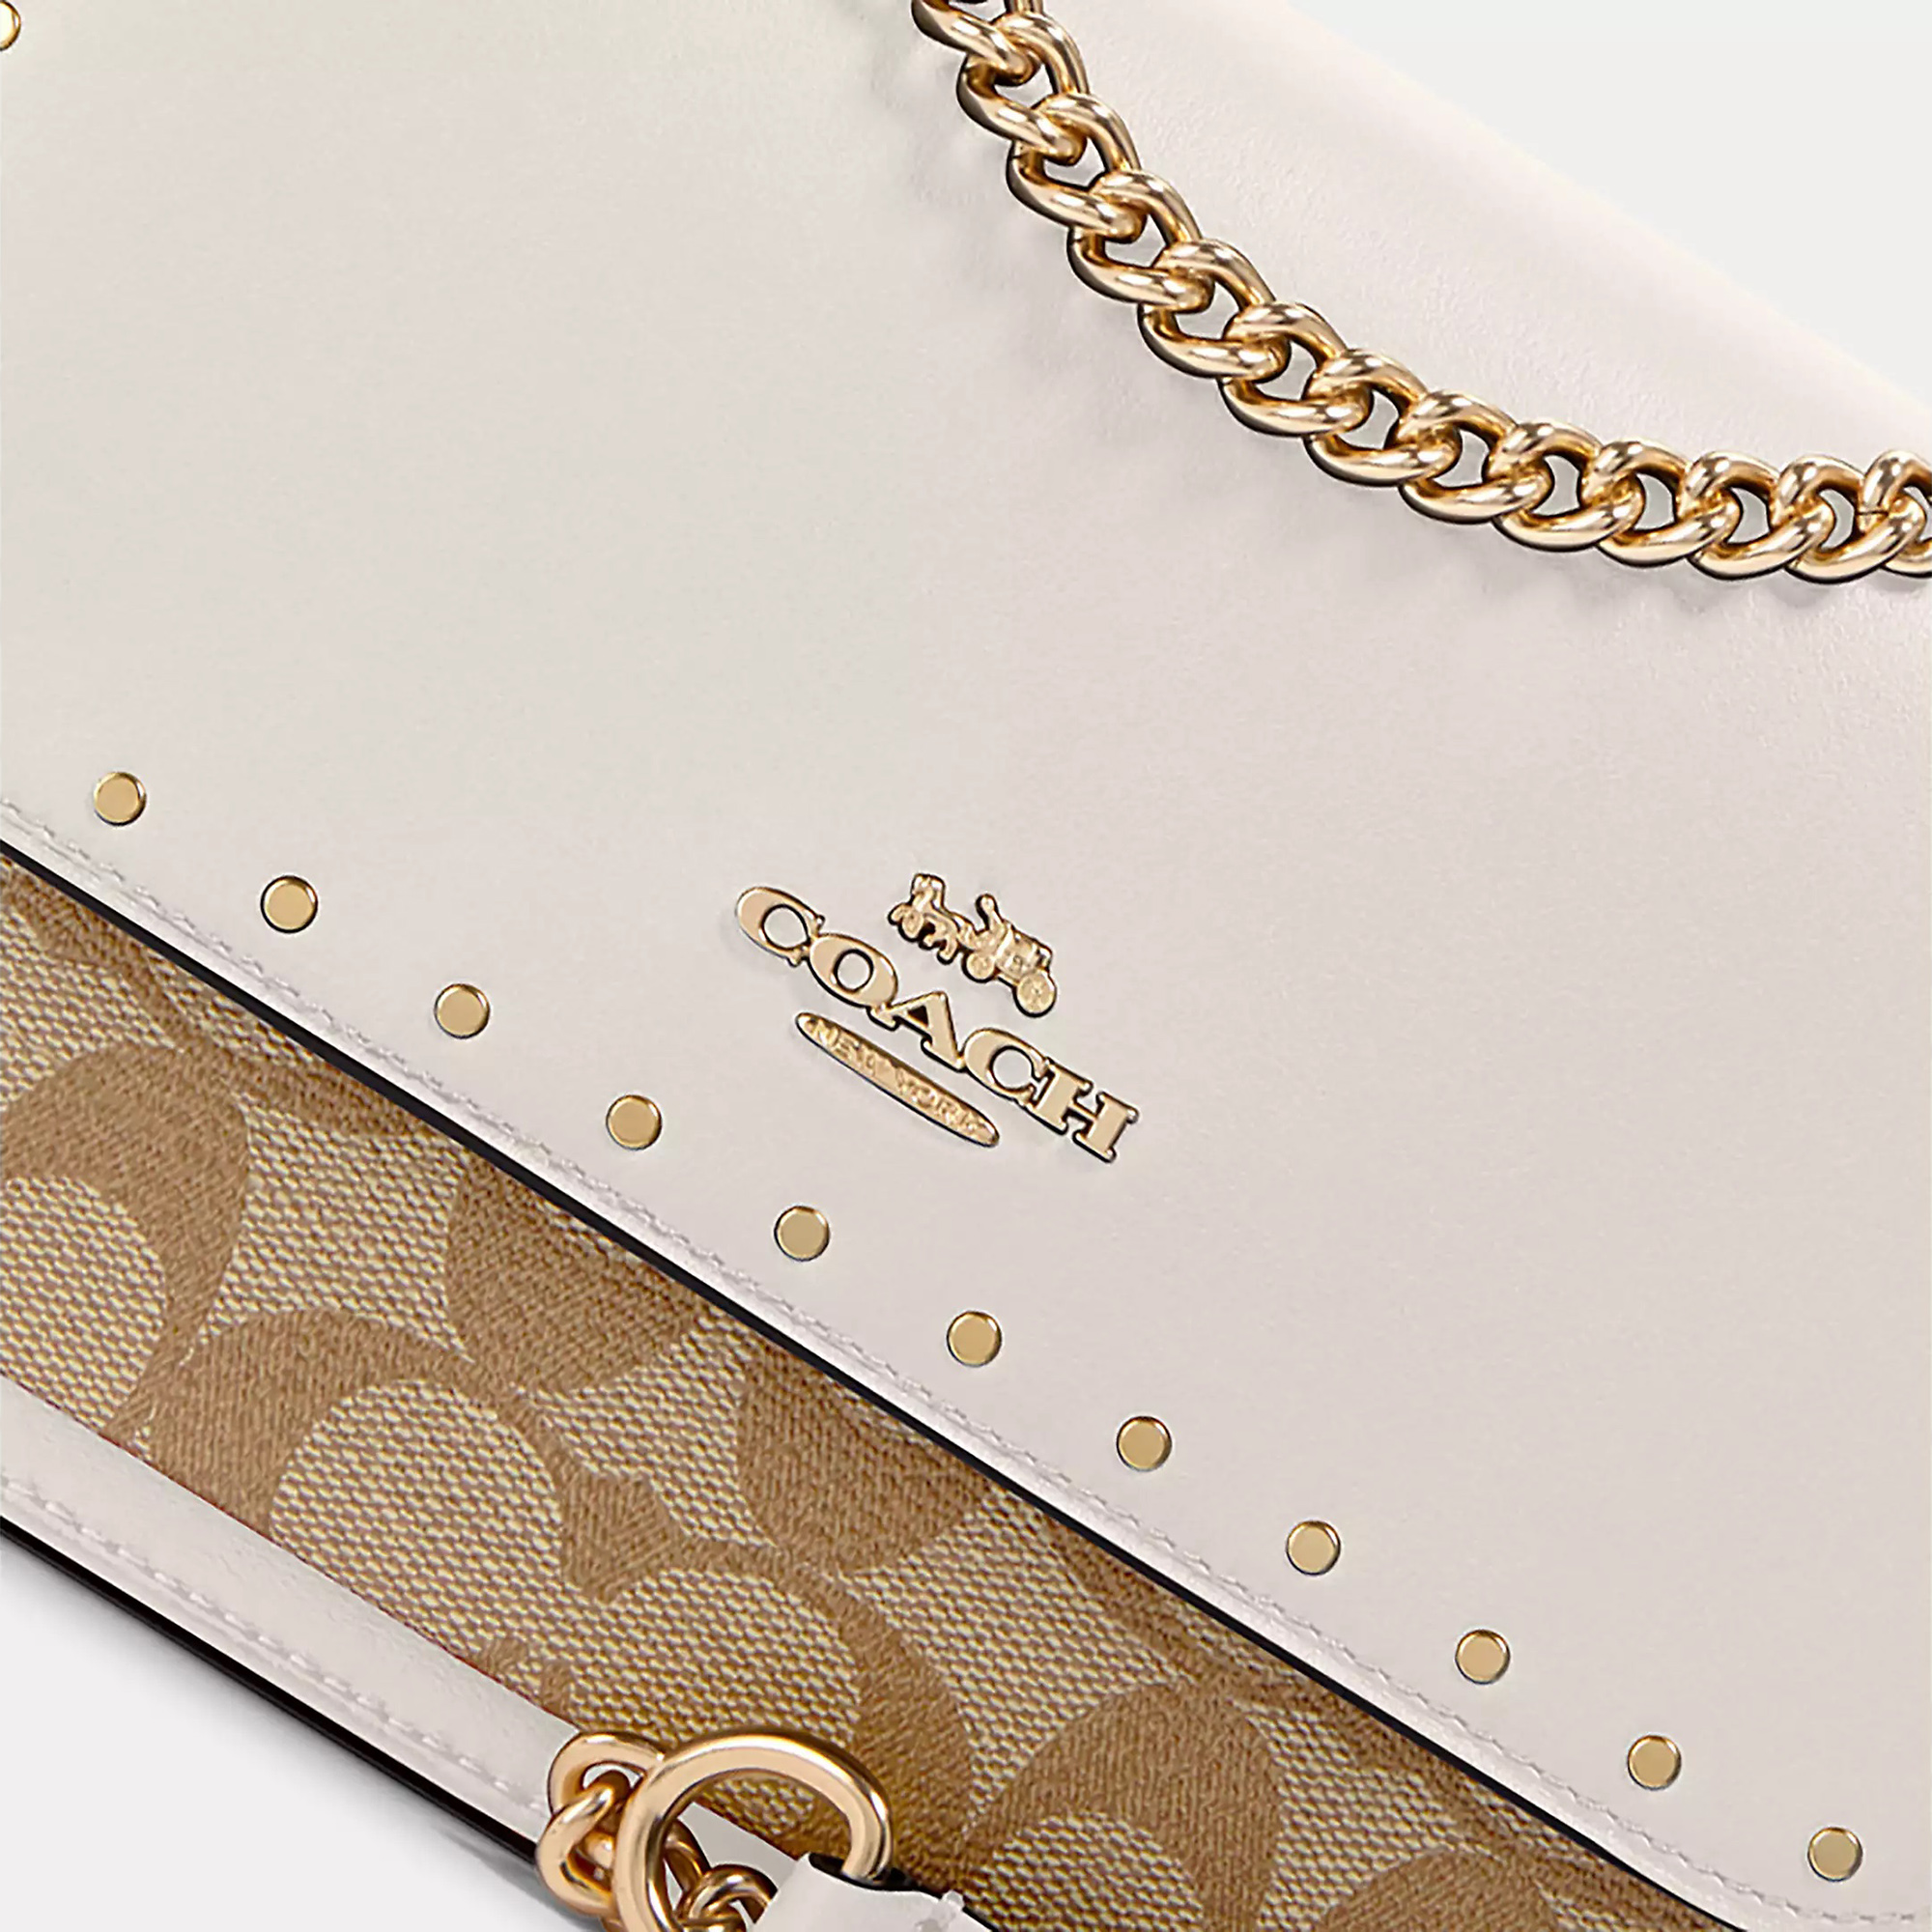 Coach White/Beige Signature Coated Canvas And Snake Embossed Leather Klare Crossbody Bag